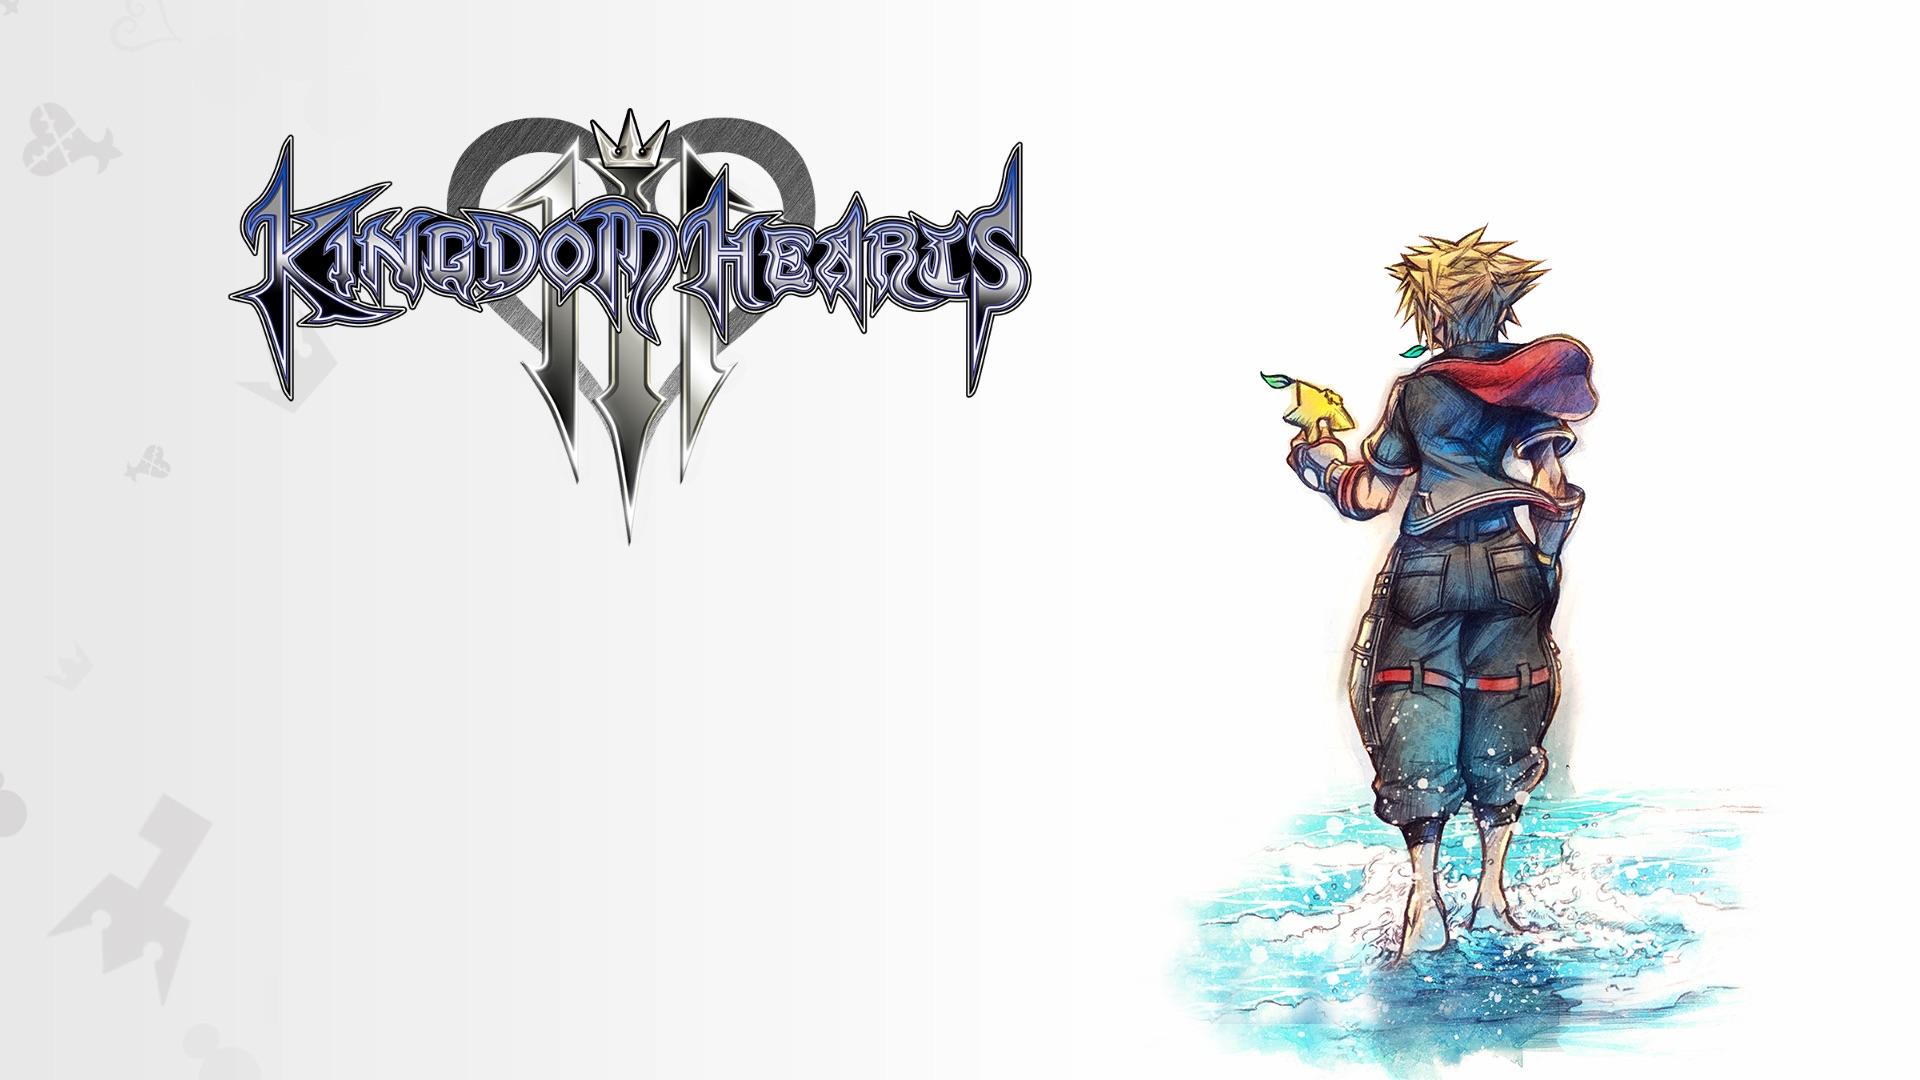 HUD Less Title Screen, Good For Wallpaper! Made In Photohop Cc: KingdomHearts